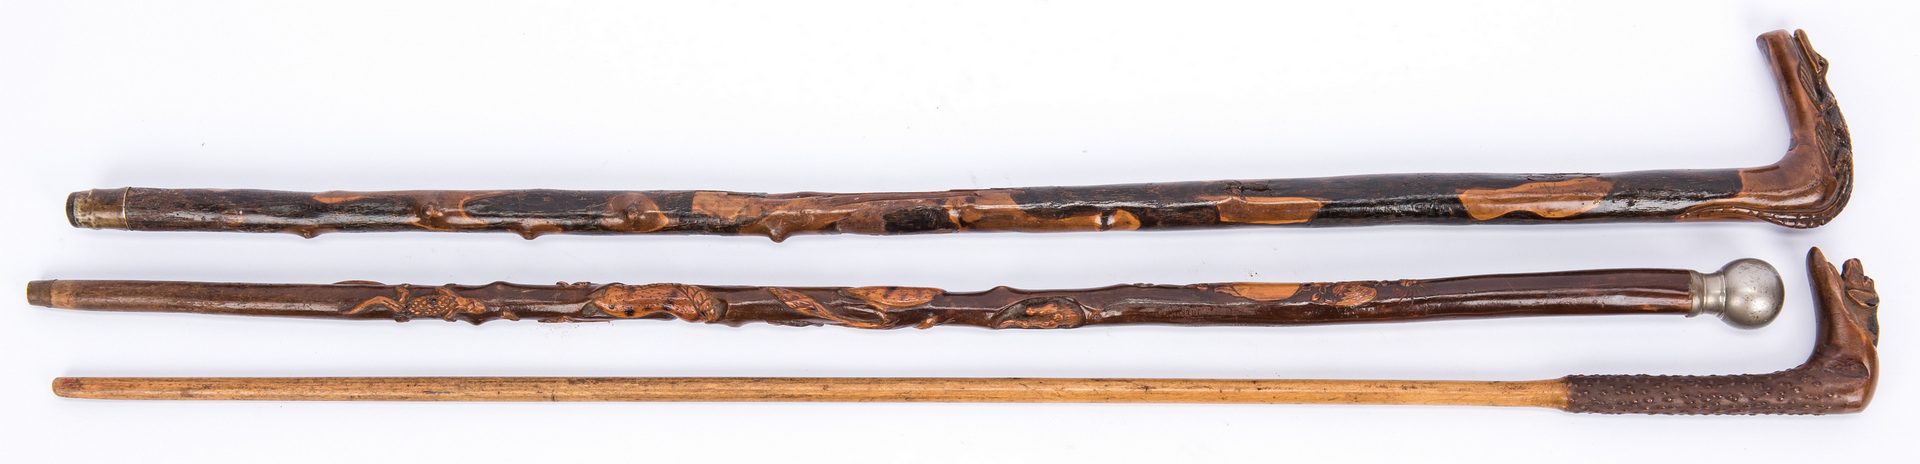 Lot 369: 6 European, American, Central American Carved Canes